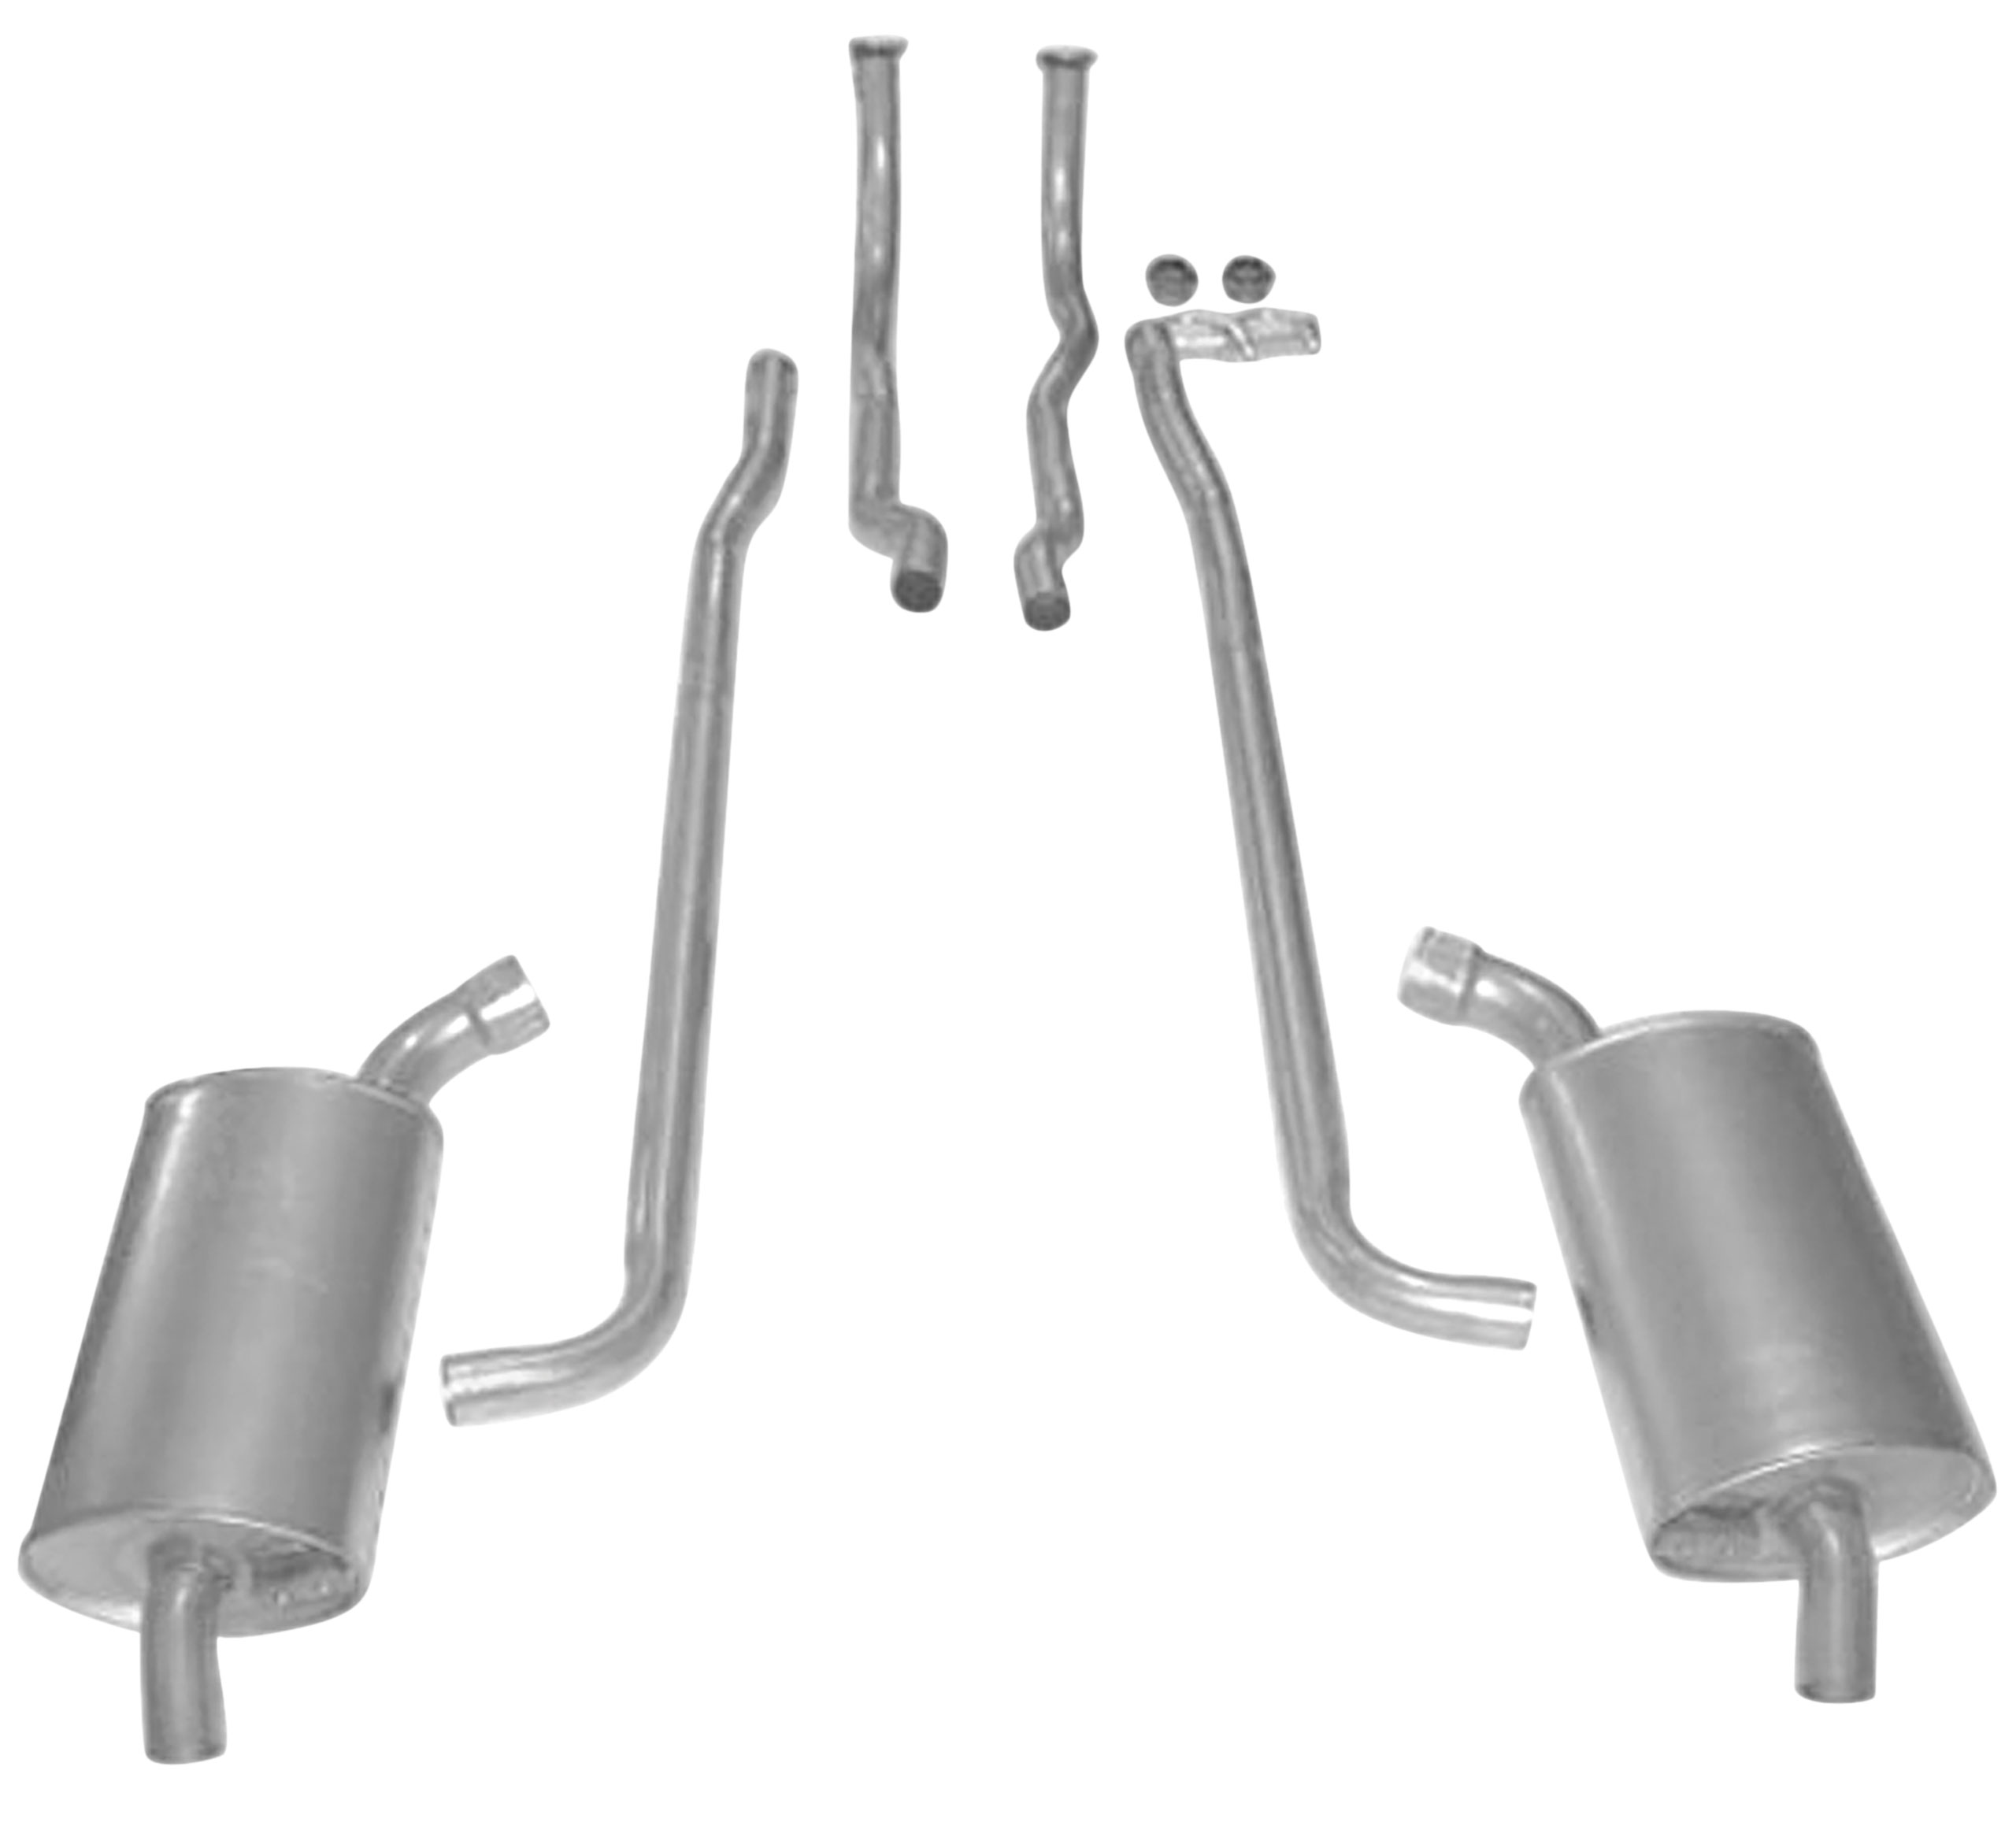 C2 1964-1965 Chevrolet Corvette Exhaust System - 2.5 Inch Complete Aluminized HP W/Manual Transmission - Auto Accessories of America